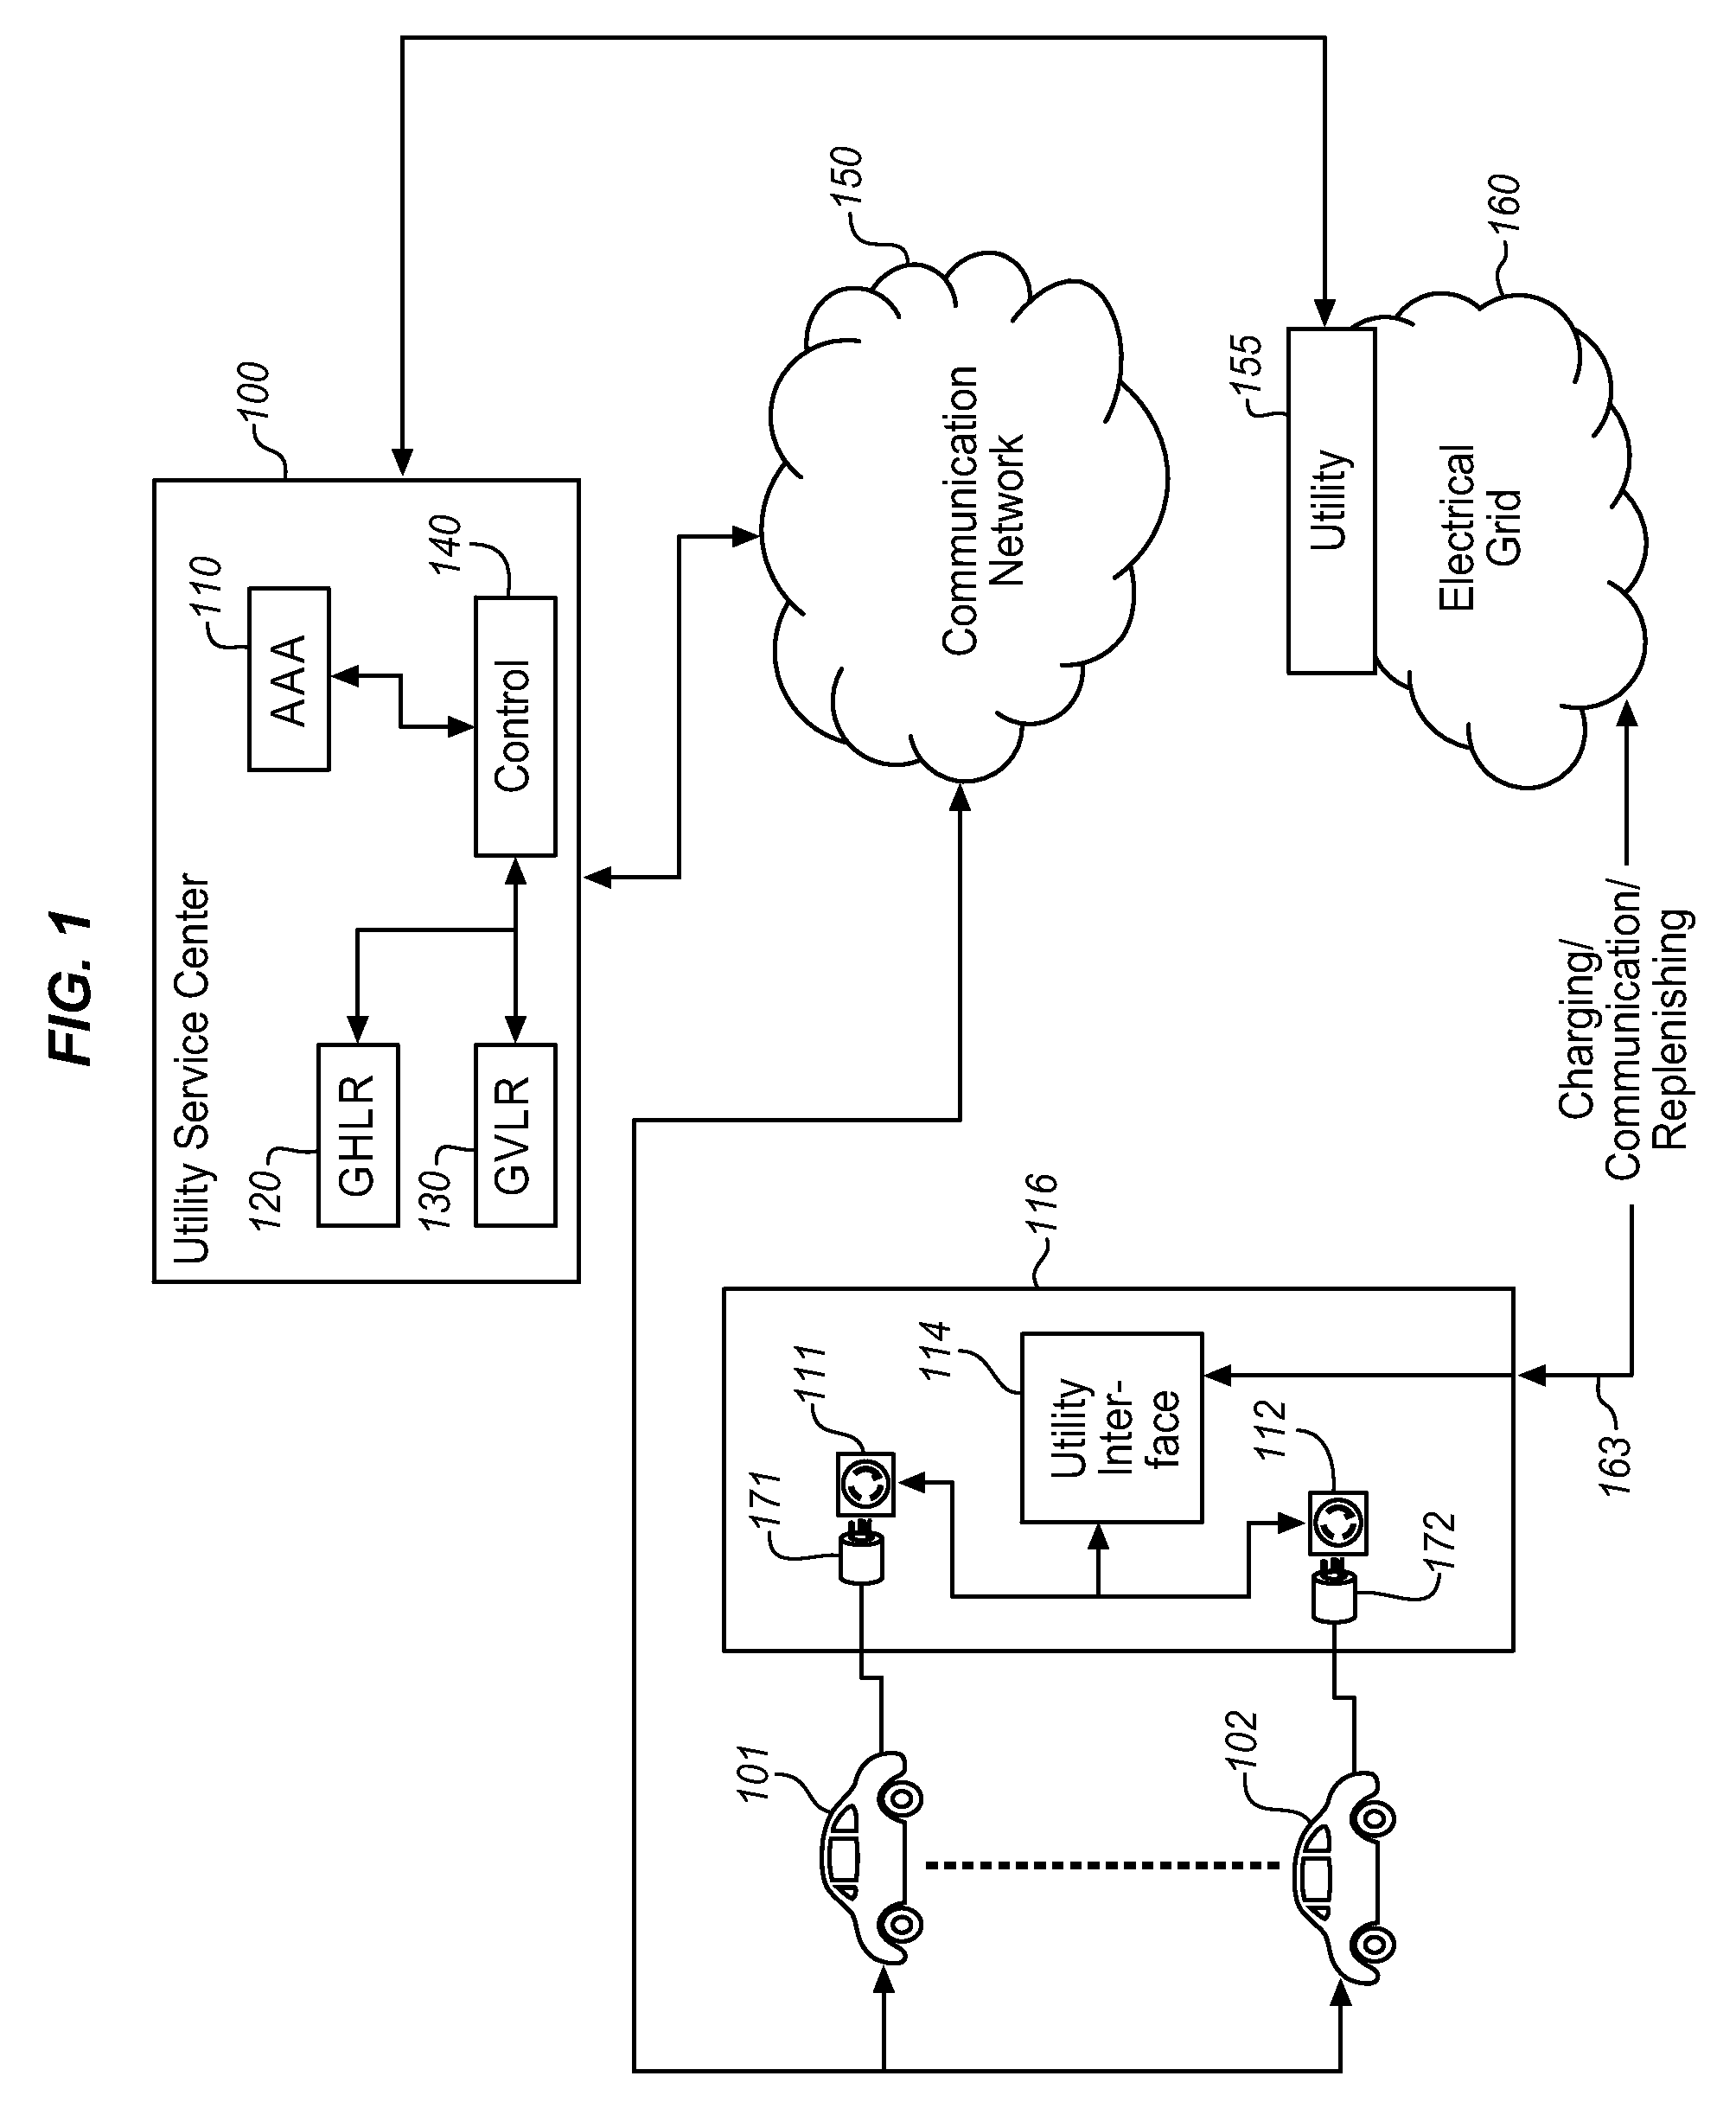 Dynamic load management for use in recharging vehicles equipped with electrically powered propulsion systems